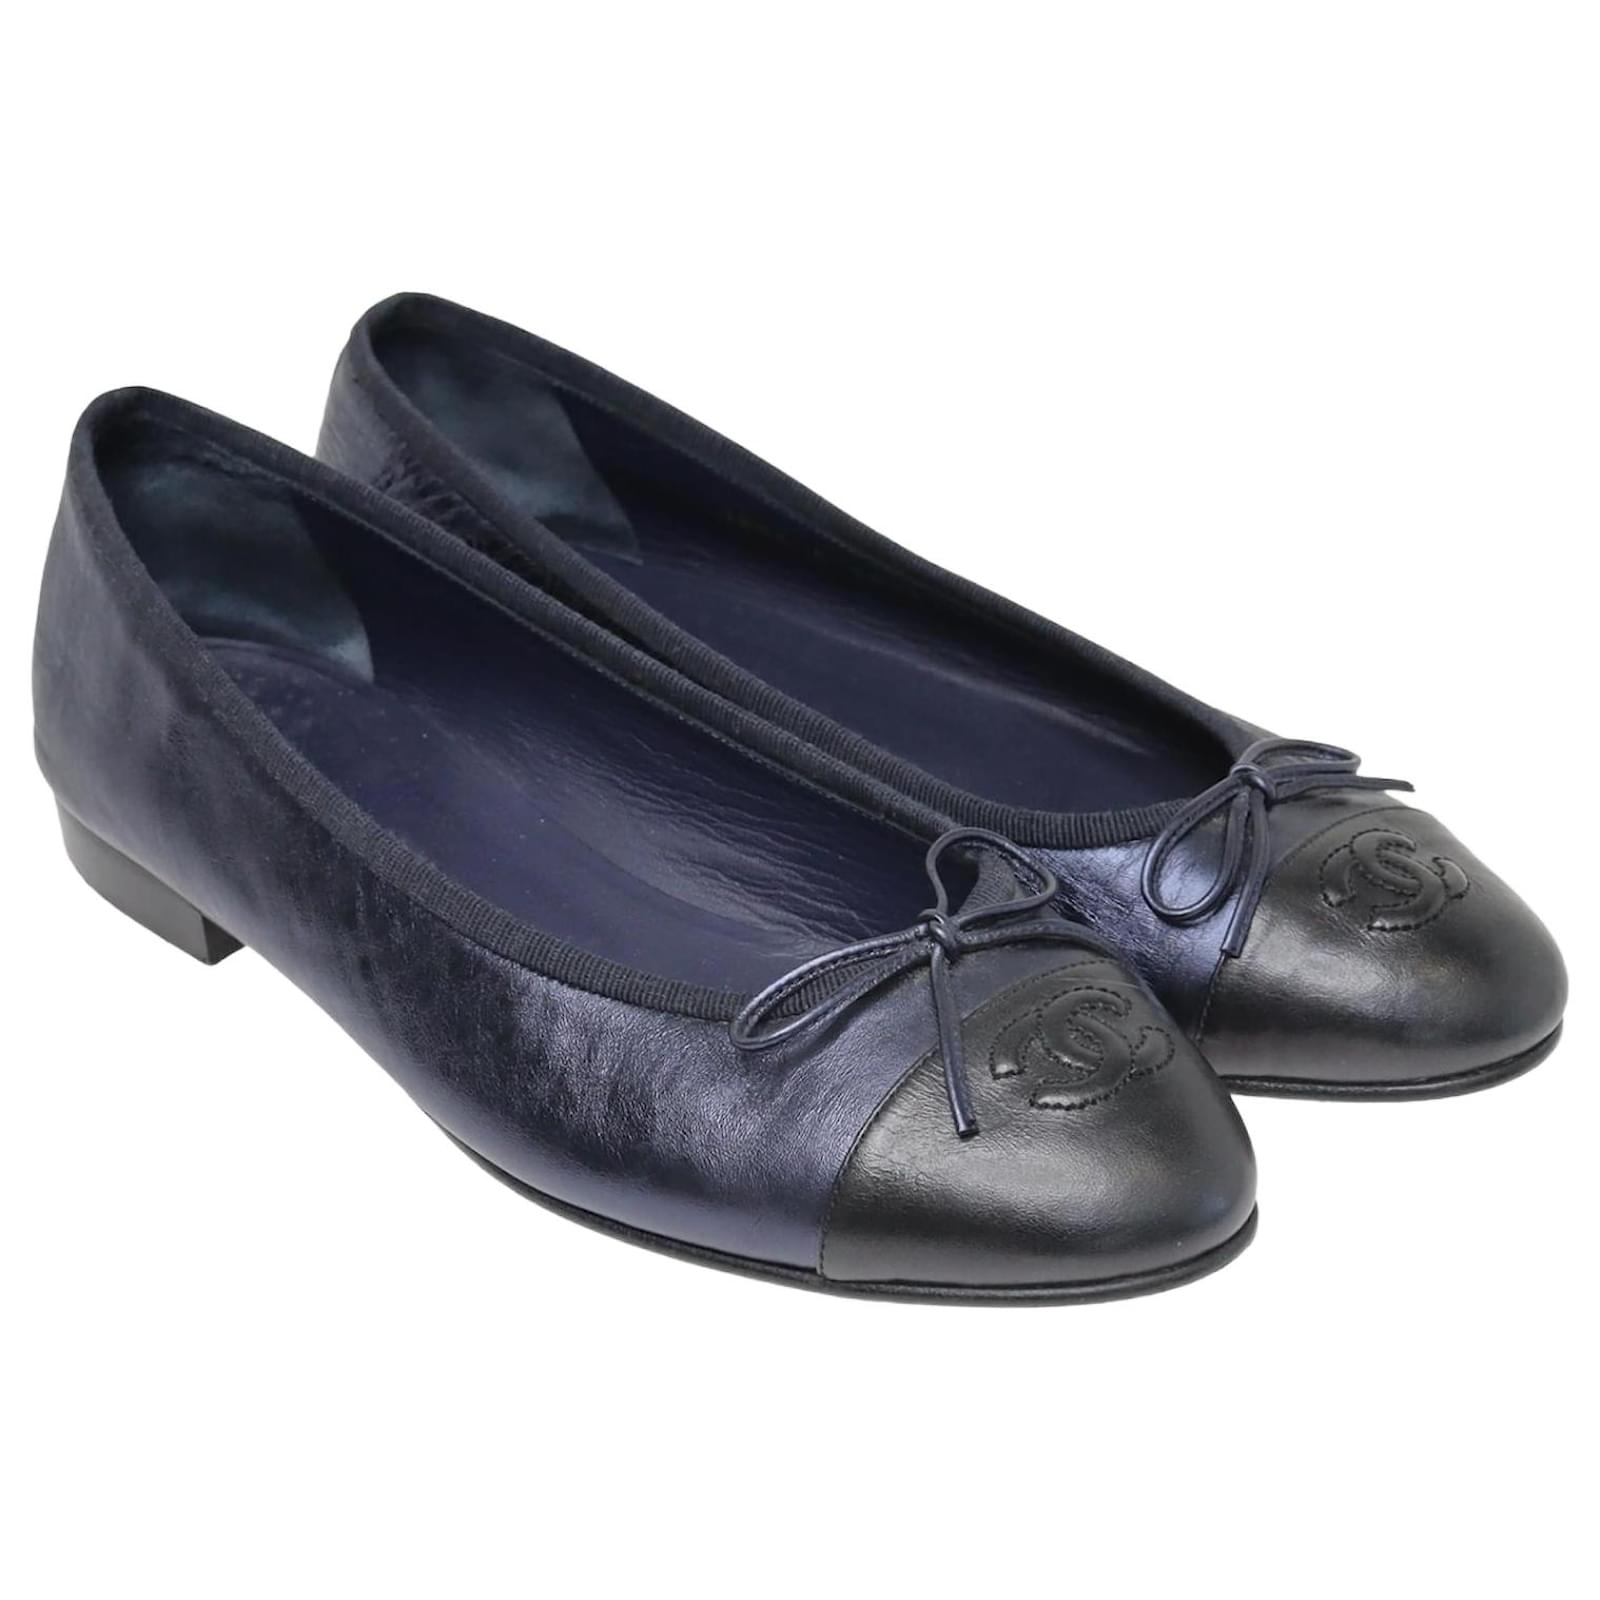 CHANEL Navy Blue Interlocking CC Logo Leather Loafers Shoes Flats